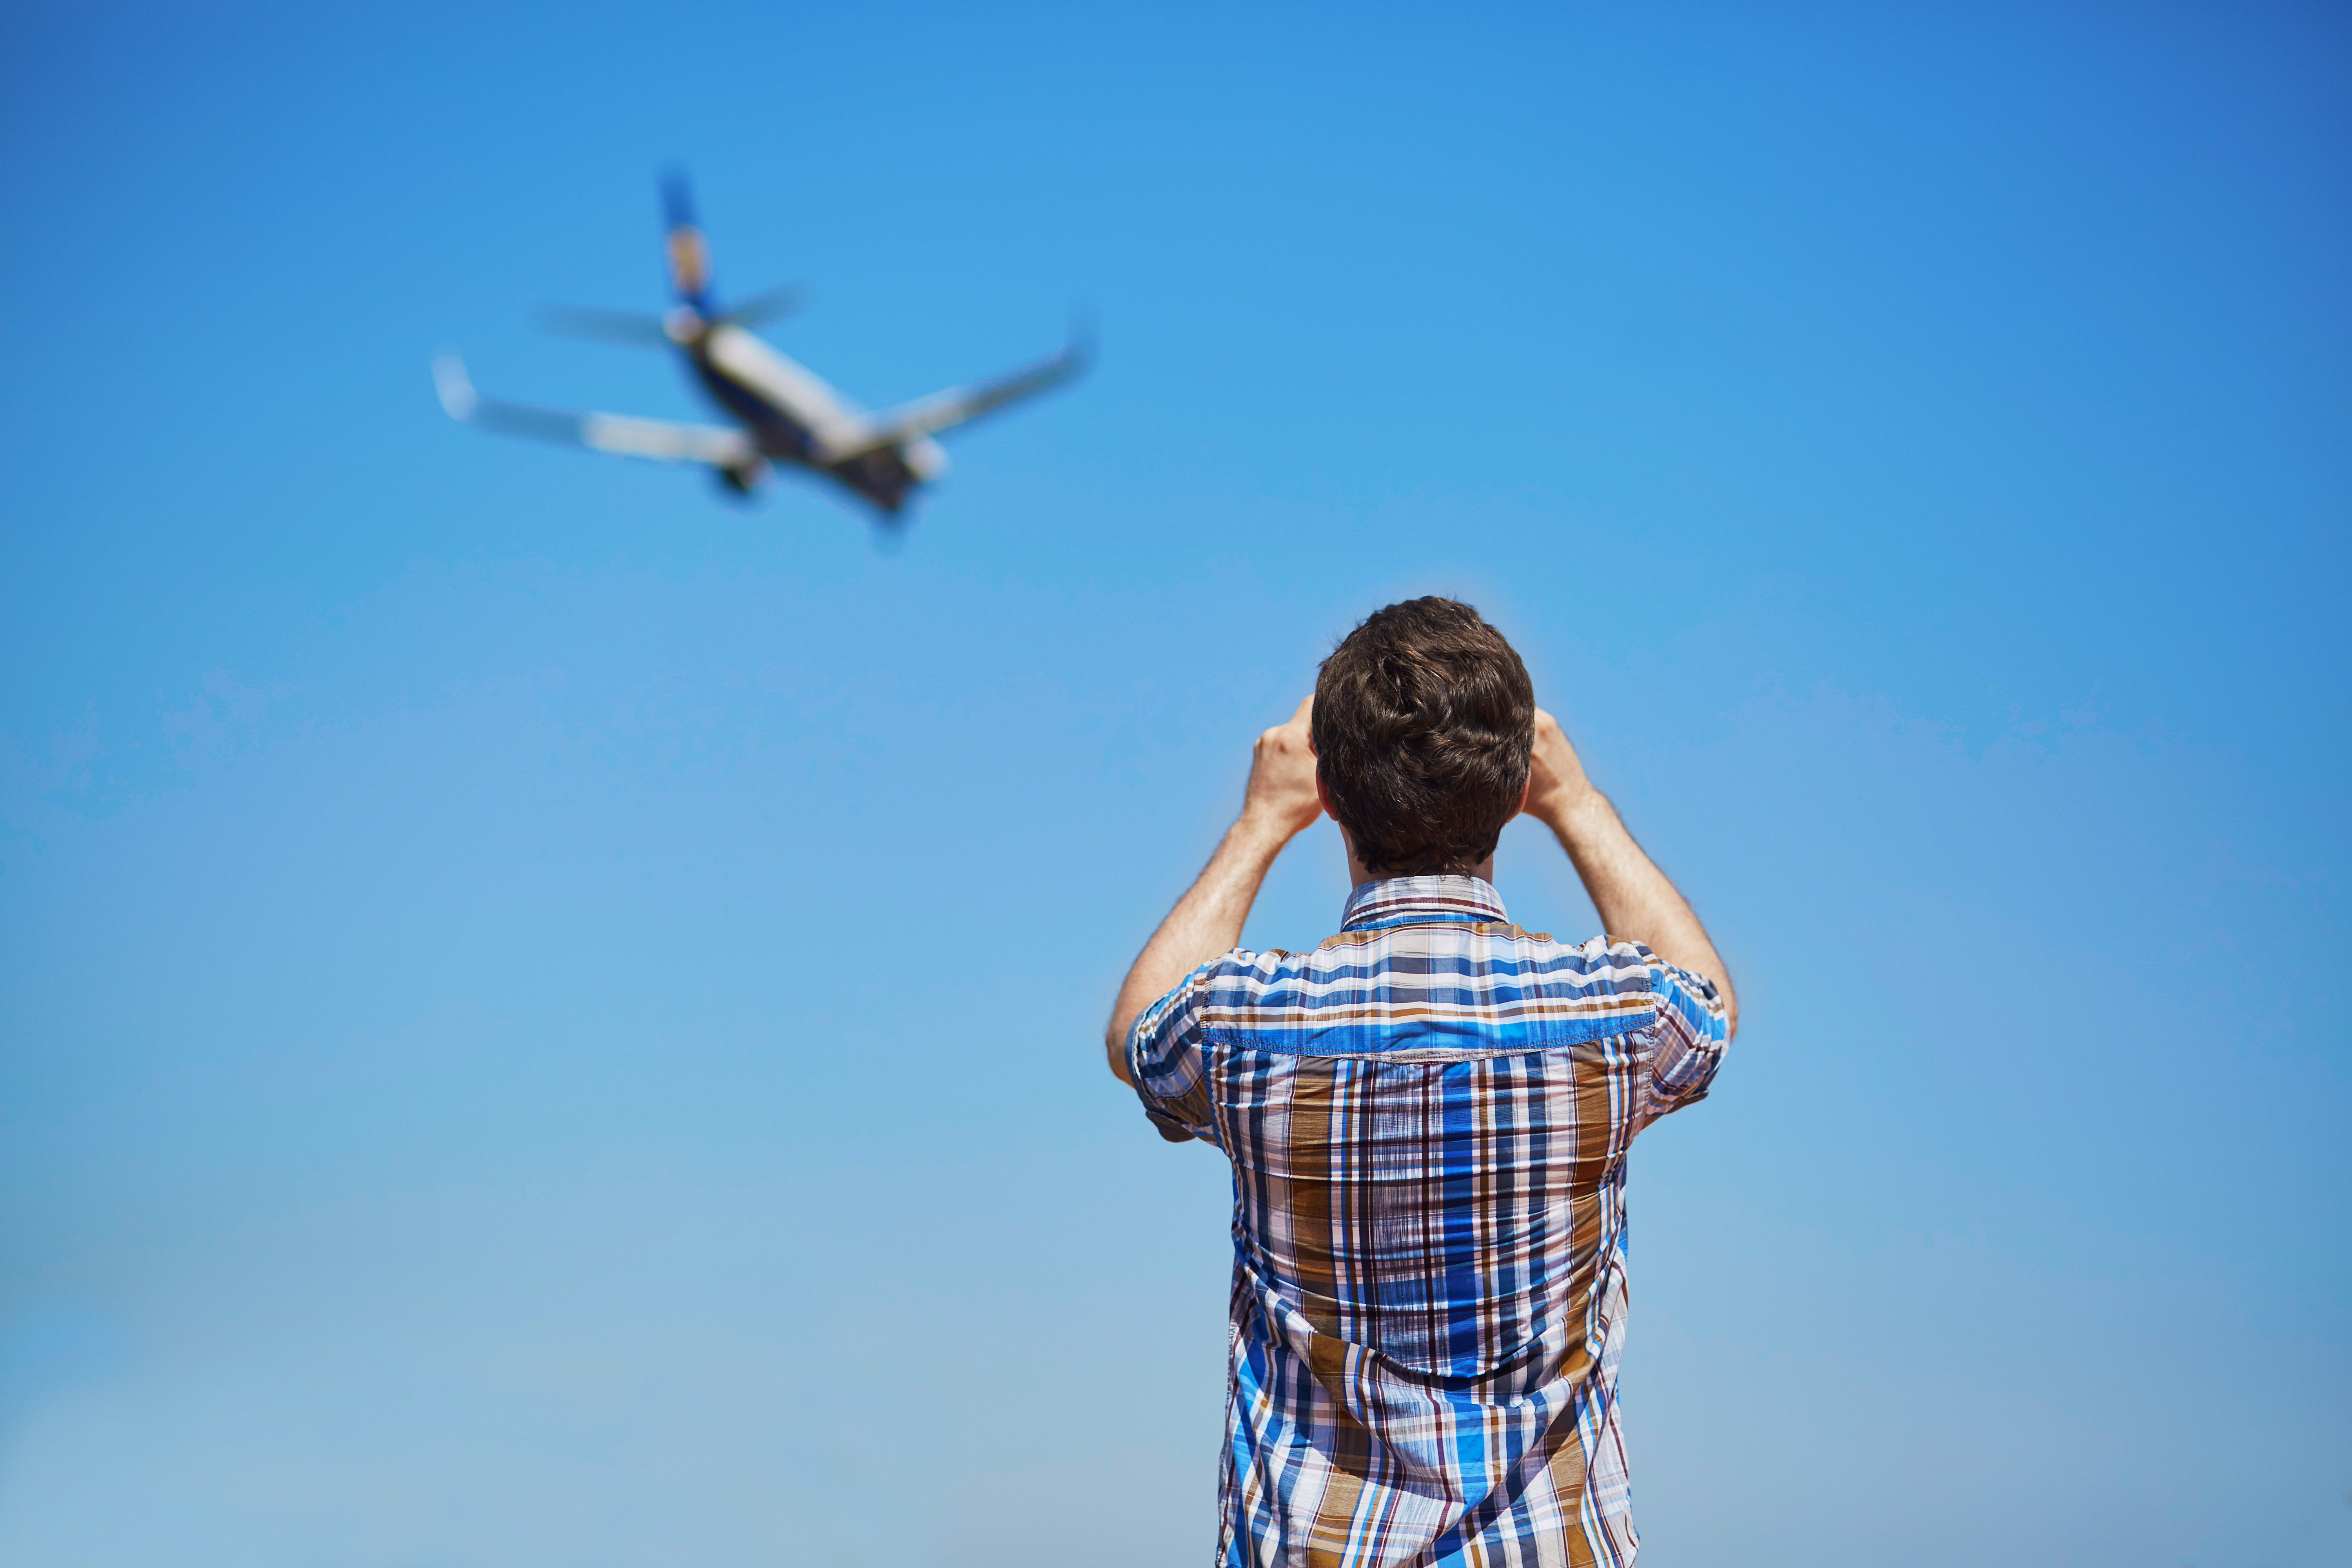 Beginners guide to plane spotting